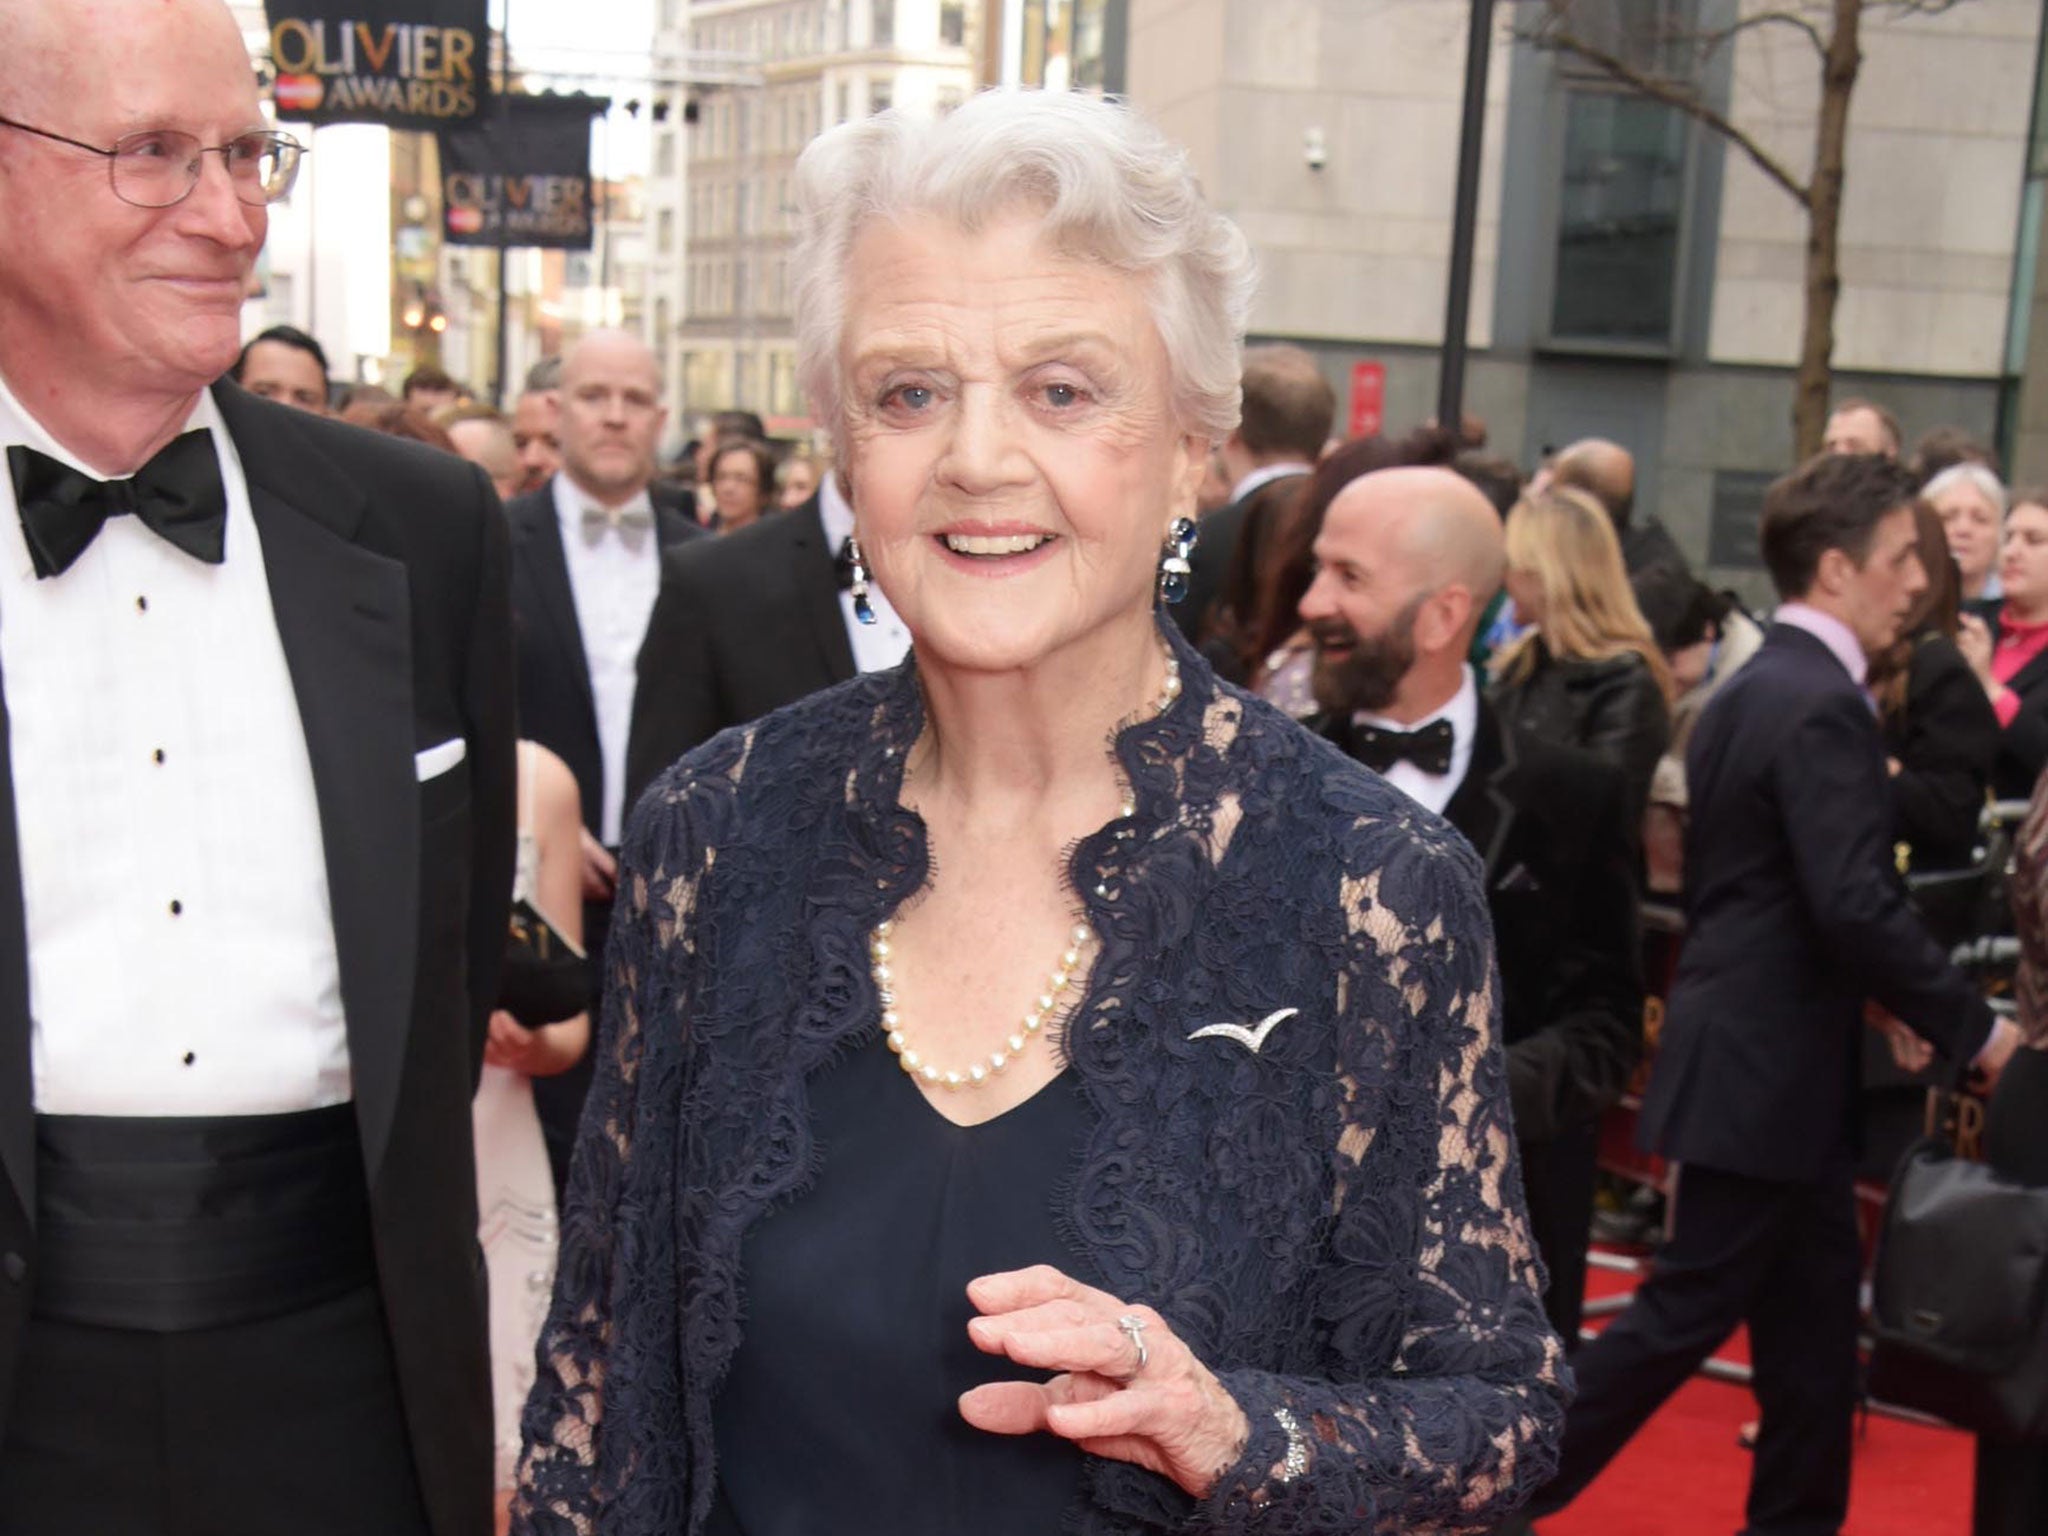 Angela Lansbury is rumoured to have a role in Game of Thrones season seven